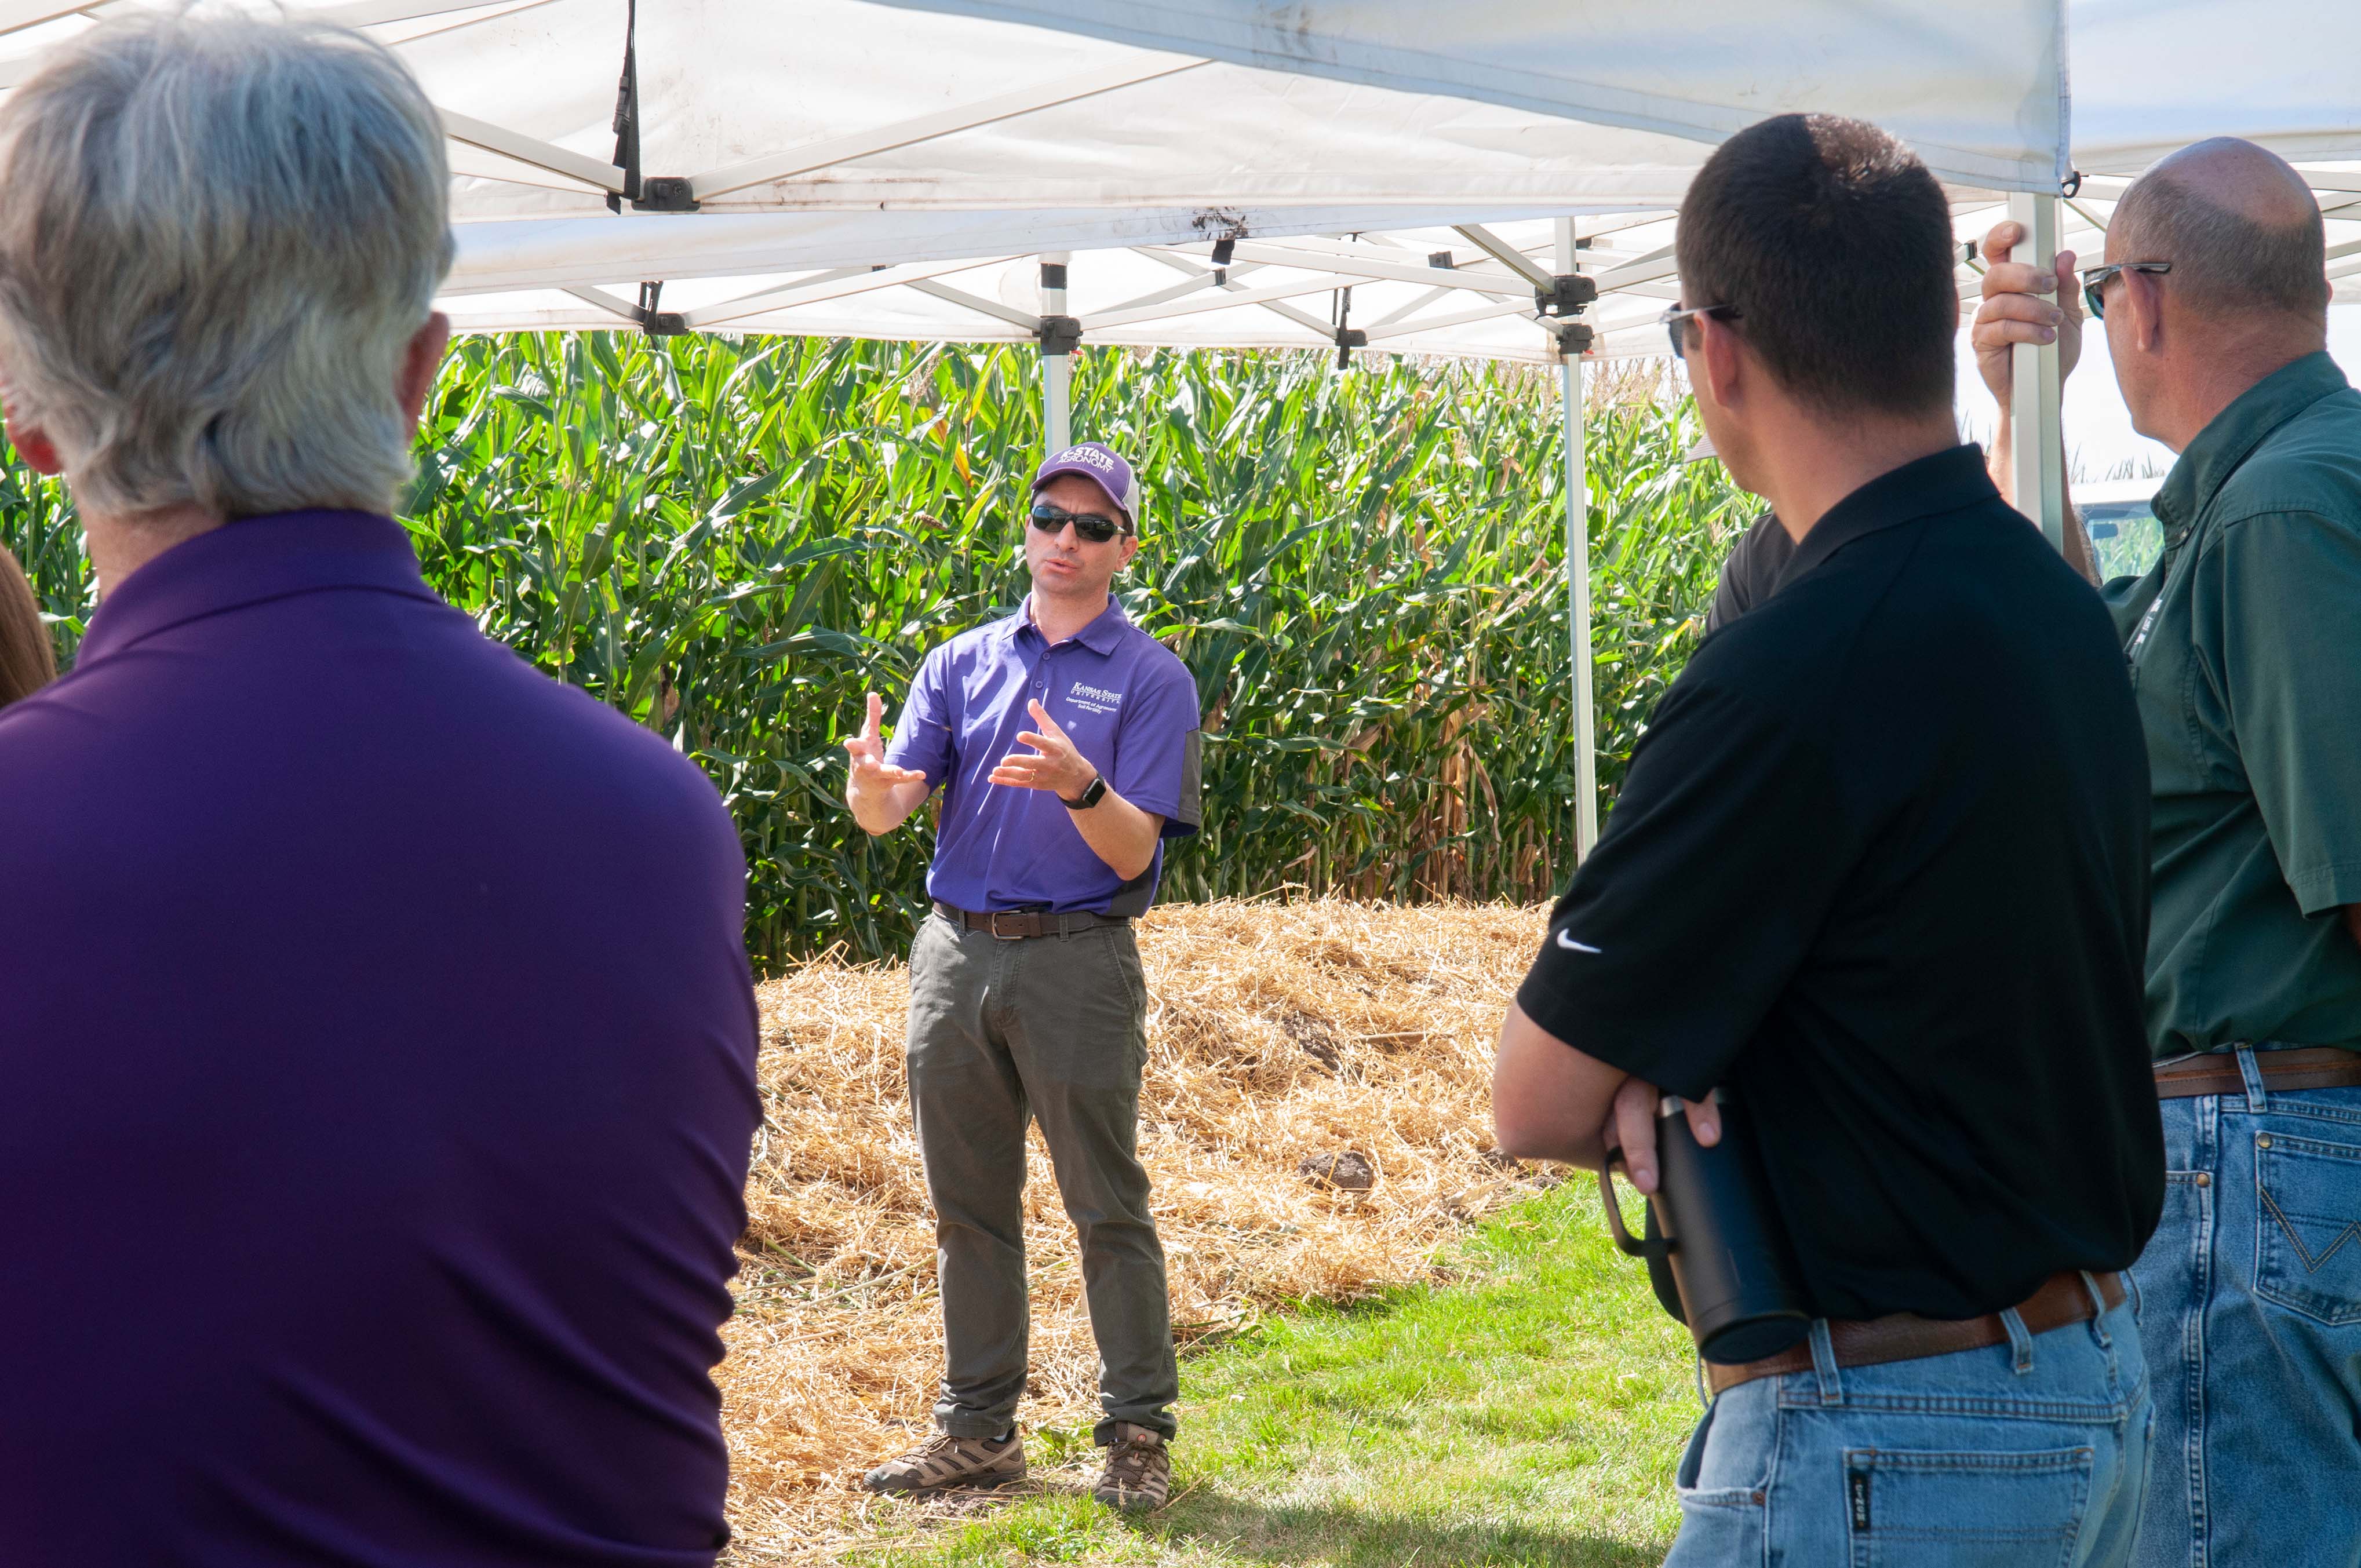 Faculty members speaking at Agronomy Field Days